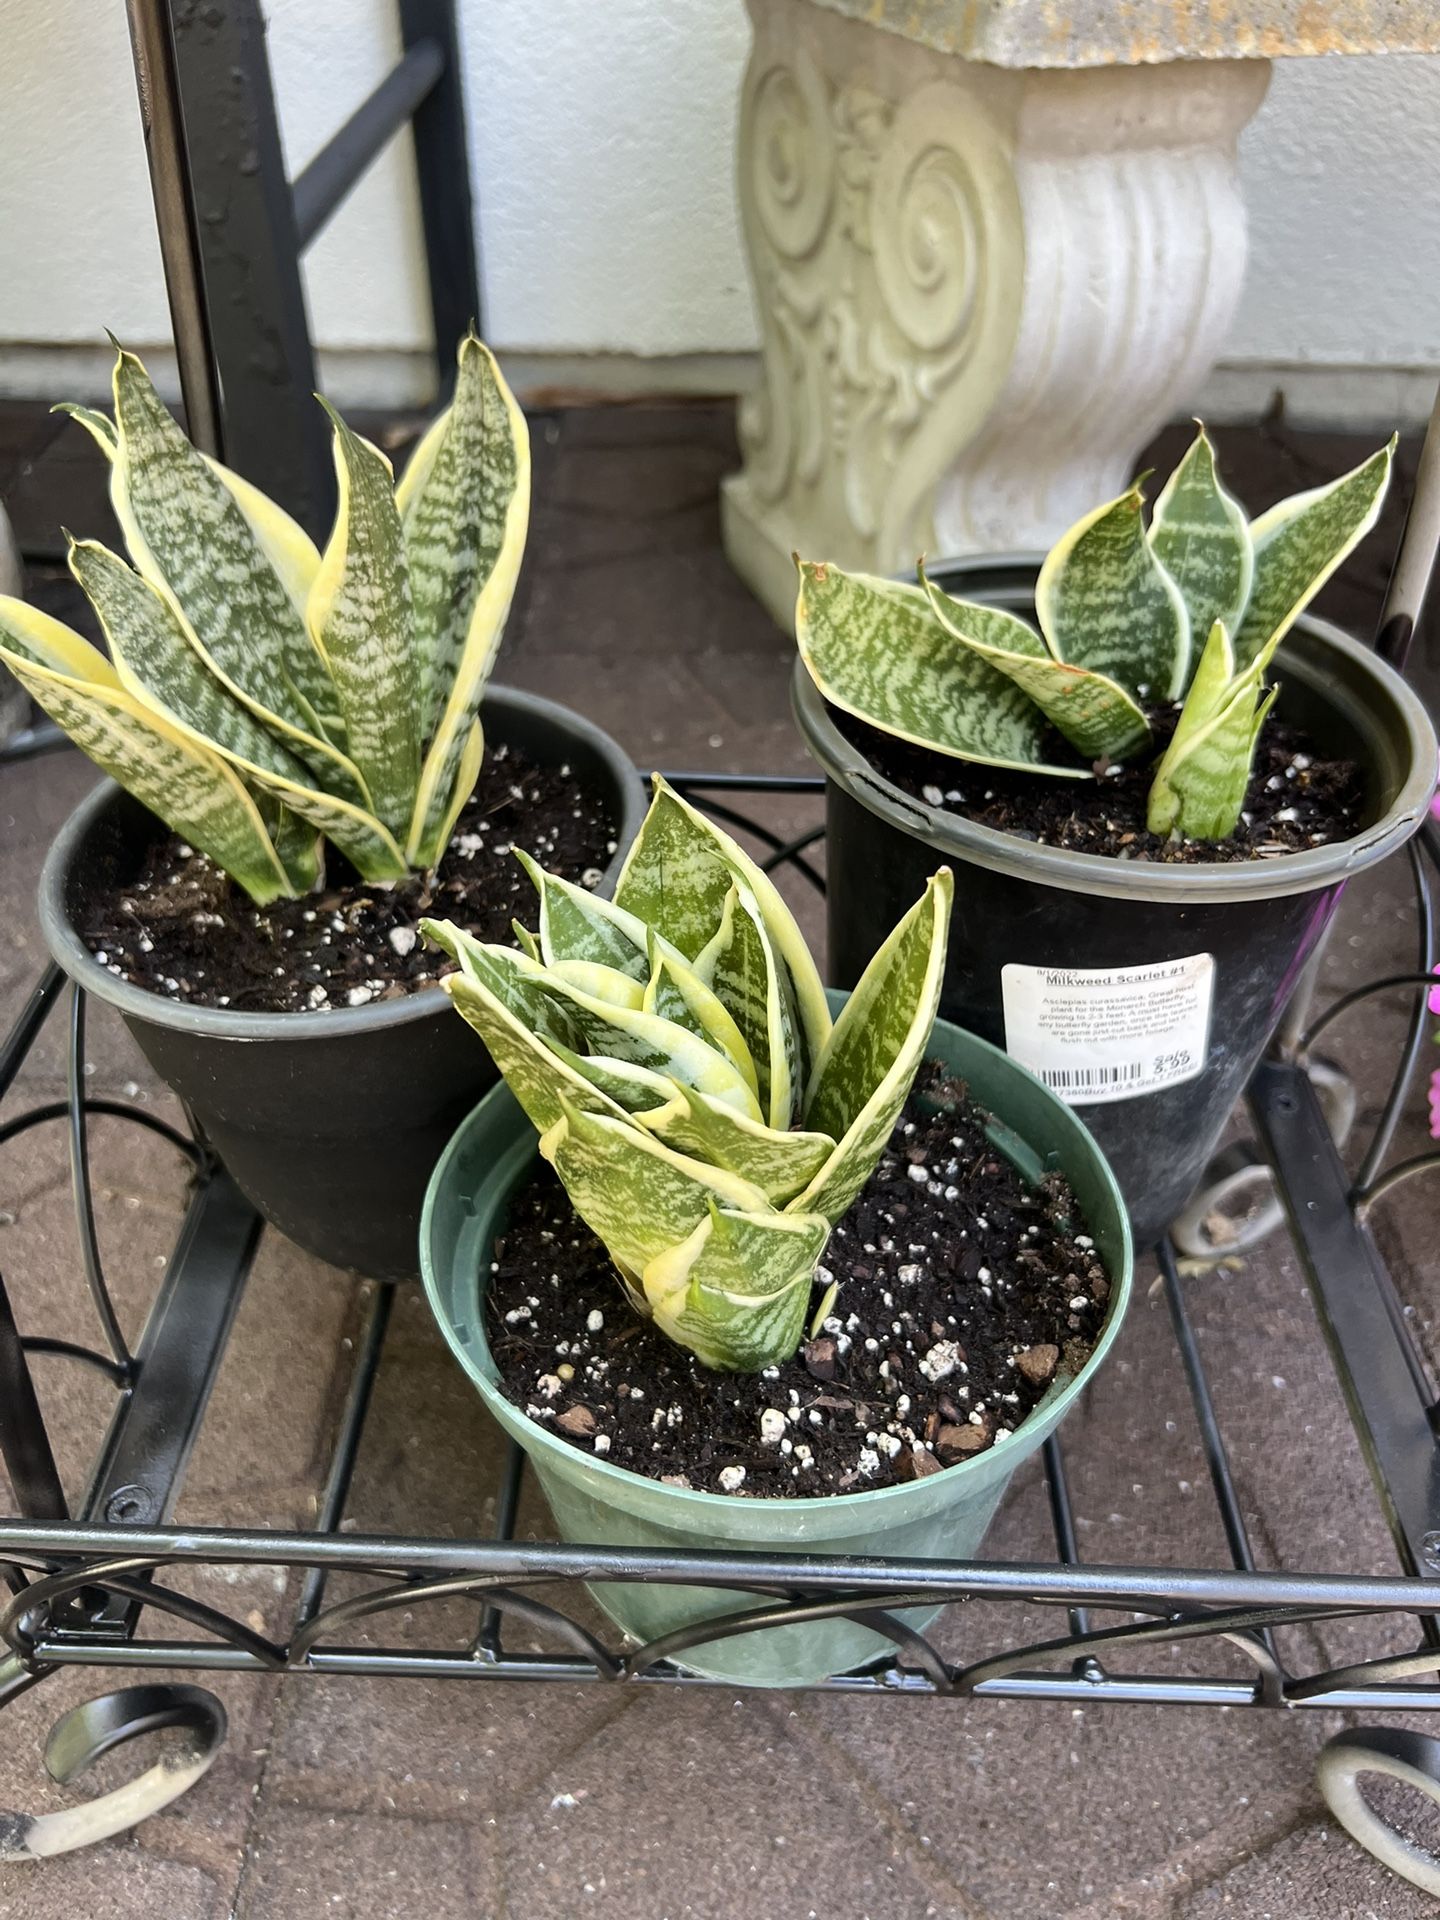 2 Mother-in-law's tongue, Snake Plant-Saint George's sword,